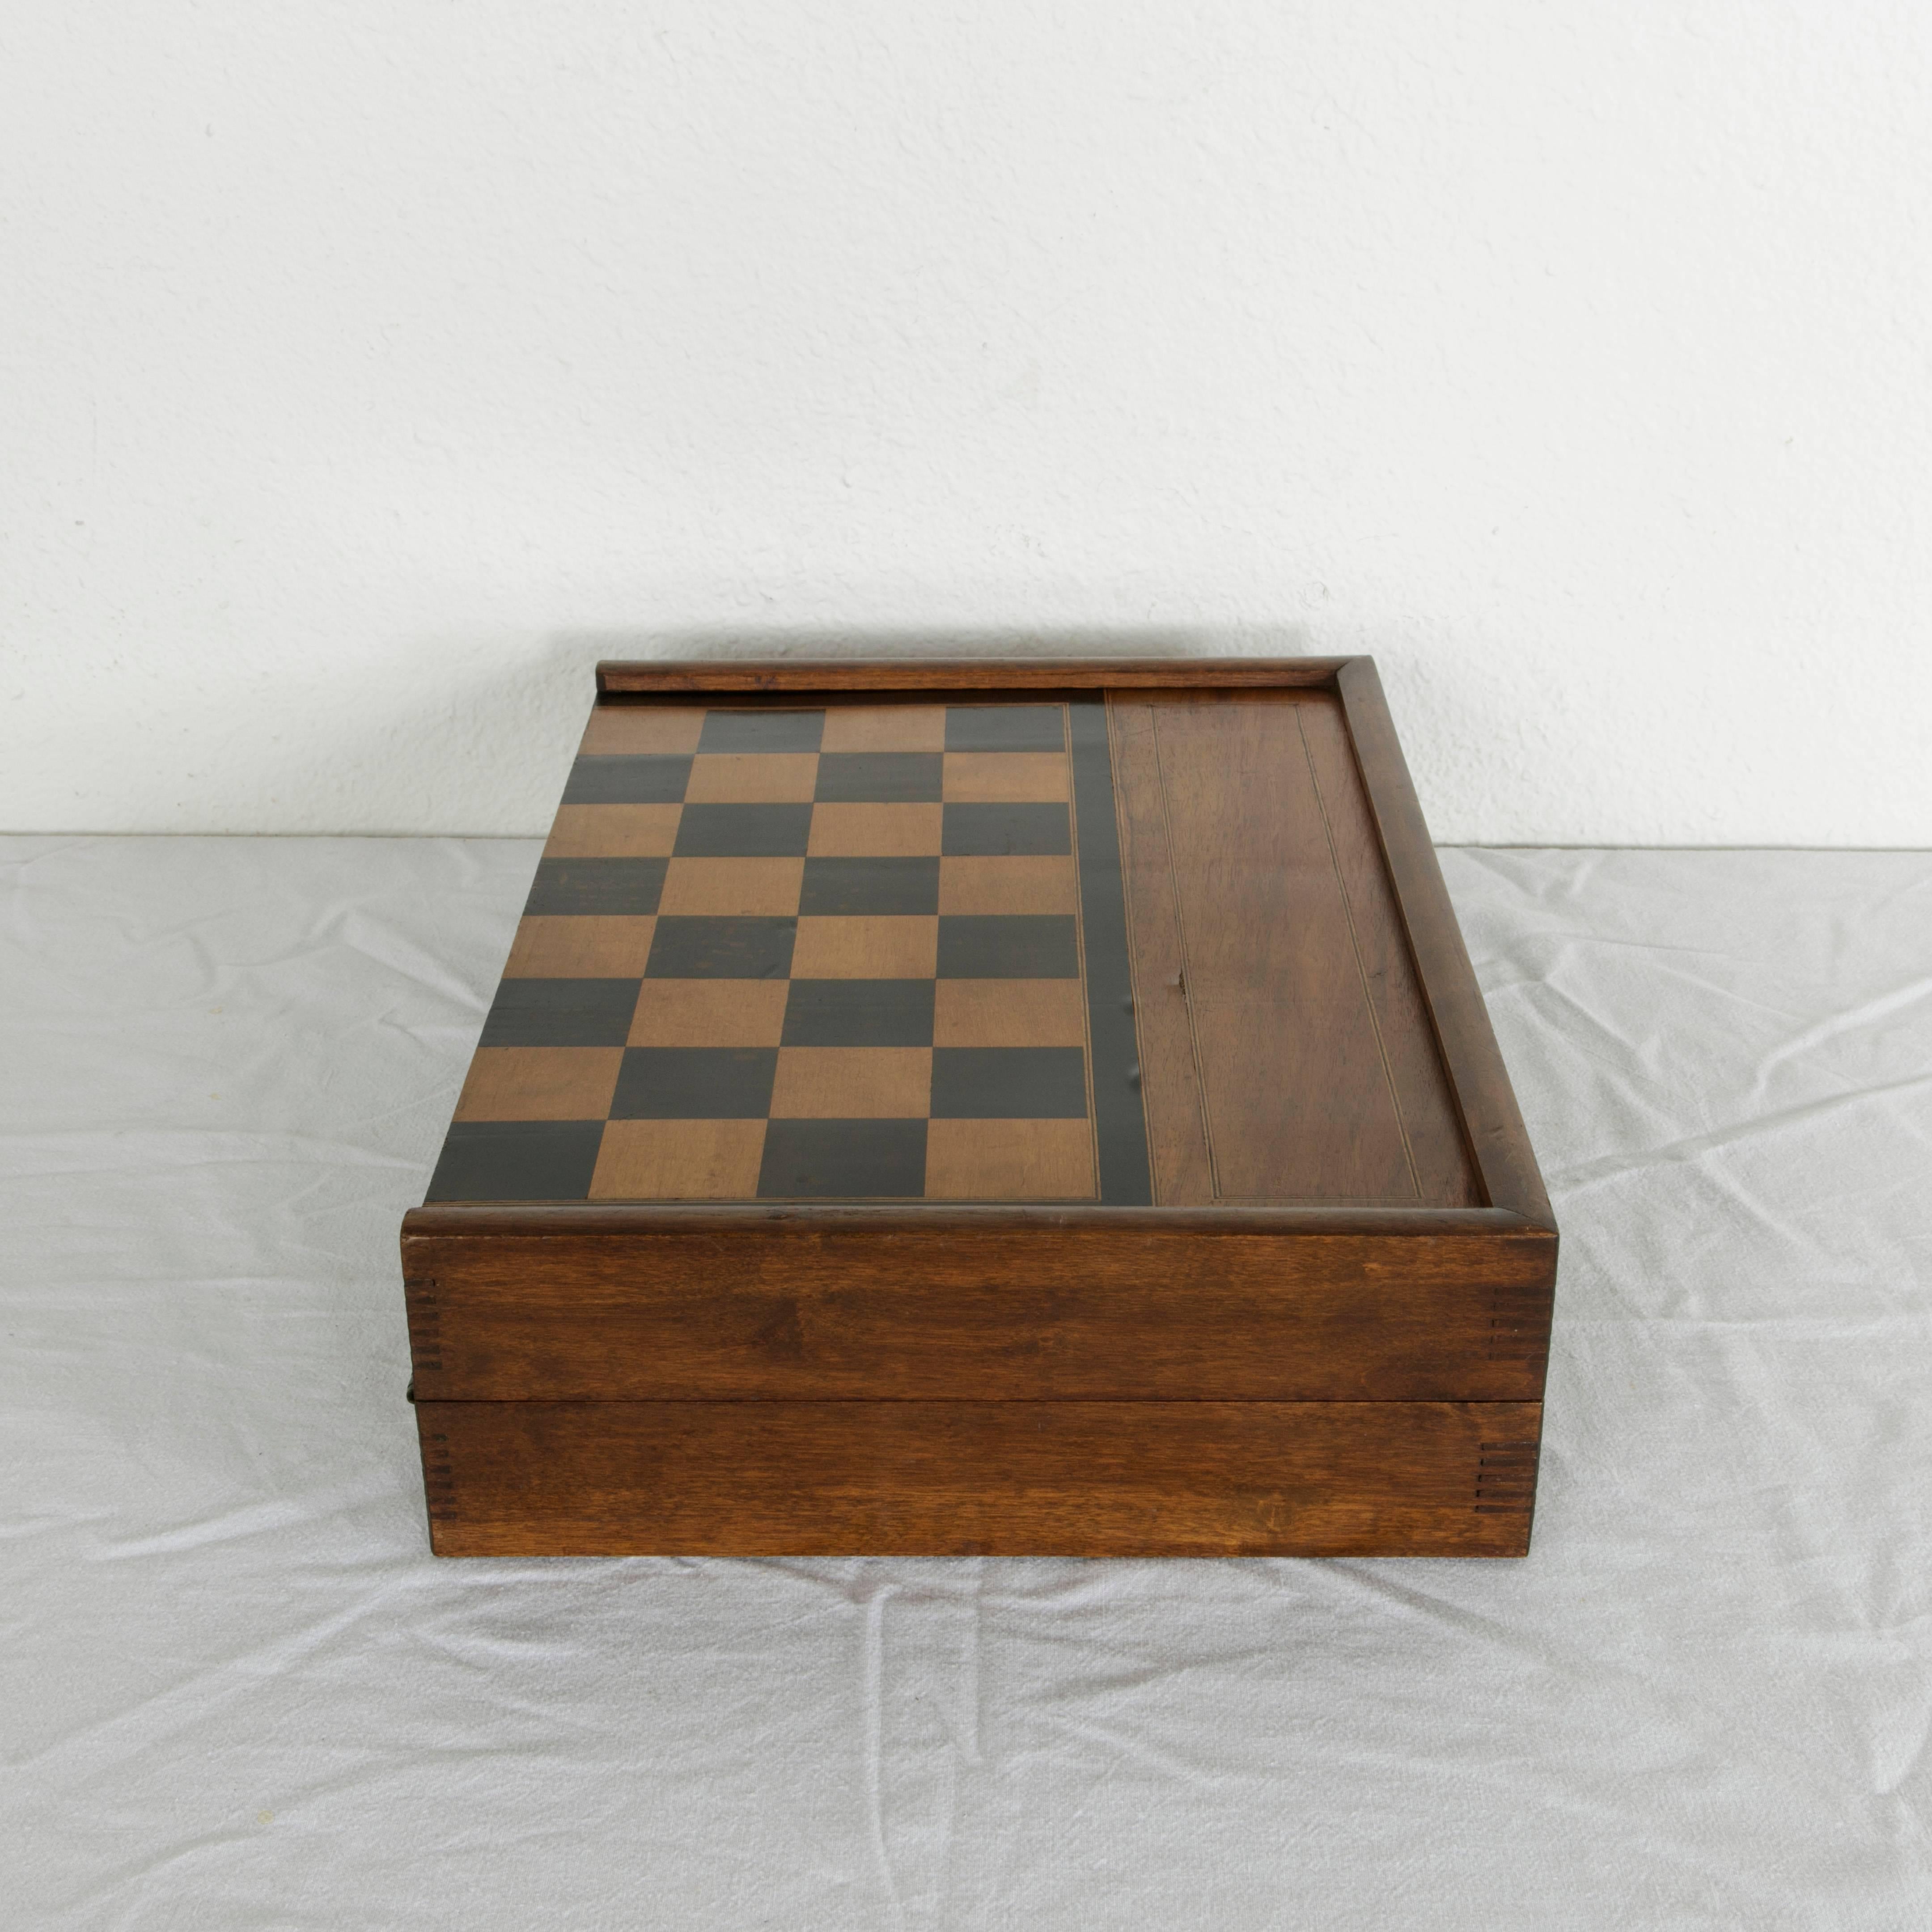 Fruitwood Artisan-Made Parquetry Game Box or Board, Chess Checkers Backgammon, circa 1900